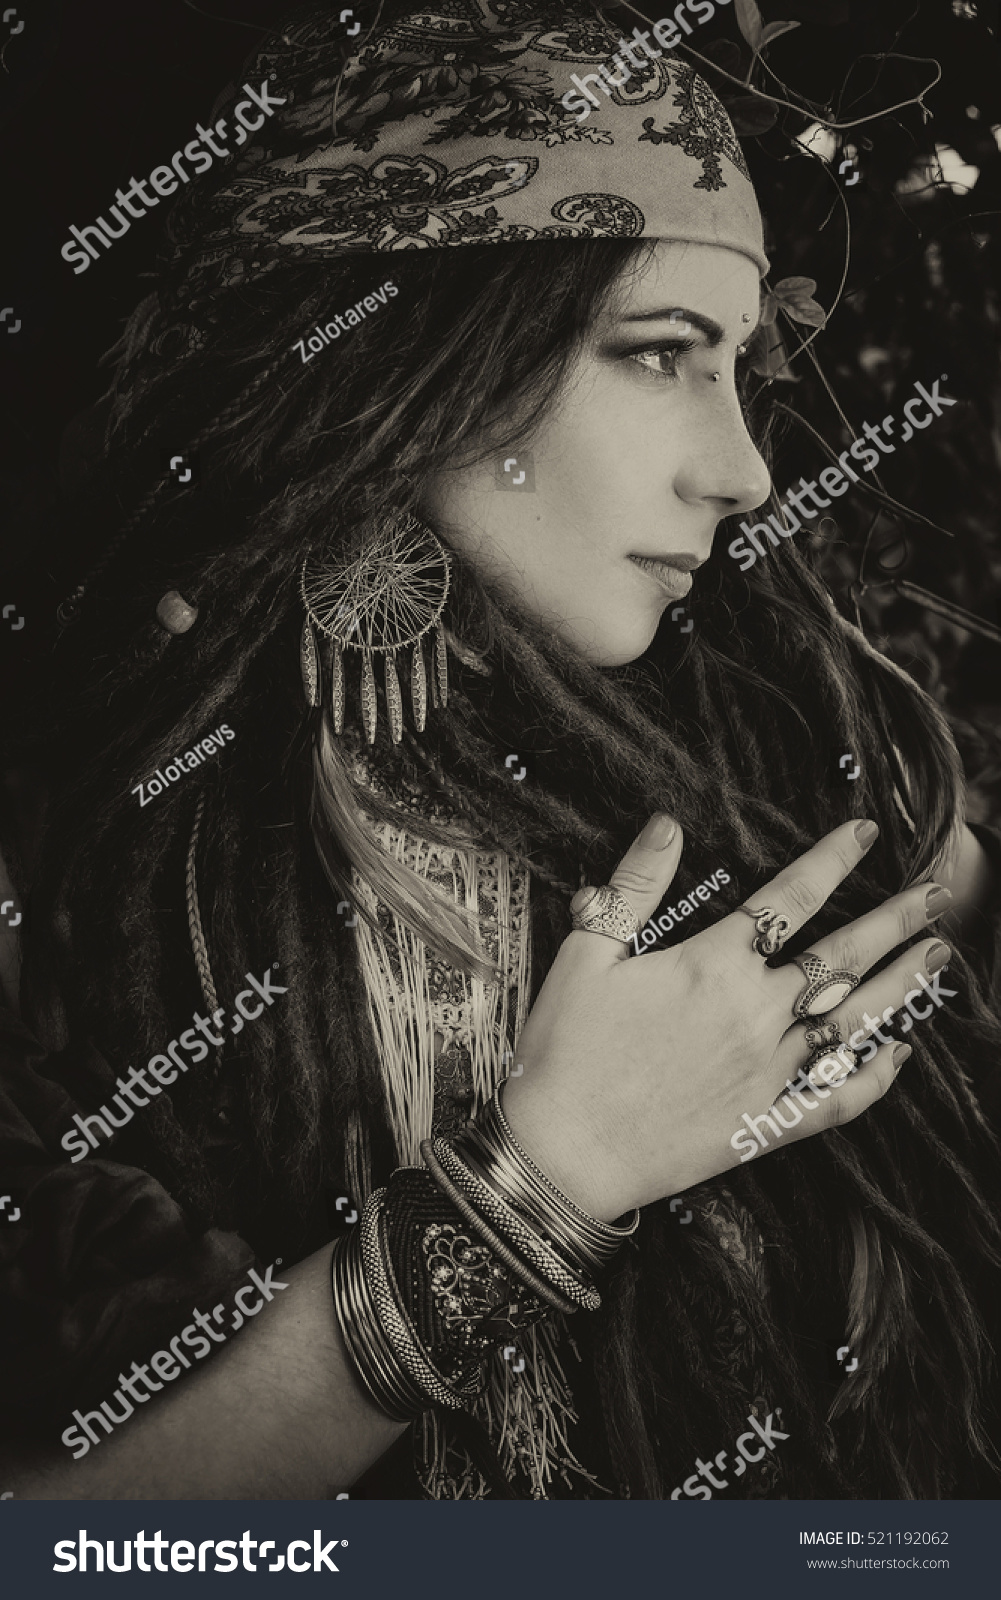 11,614 Gypsy Vintage Stock Photos, Images & Photography | Shutterstock